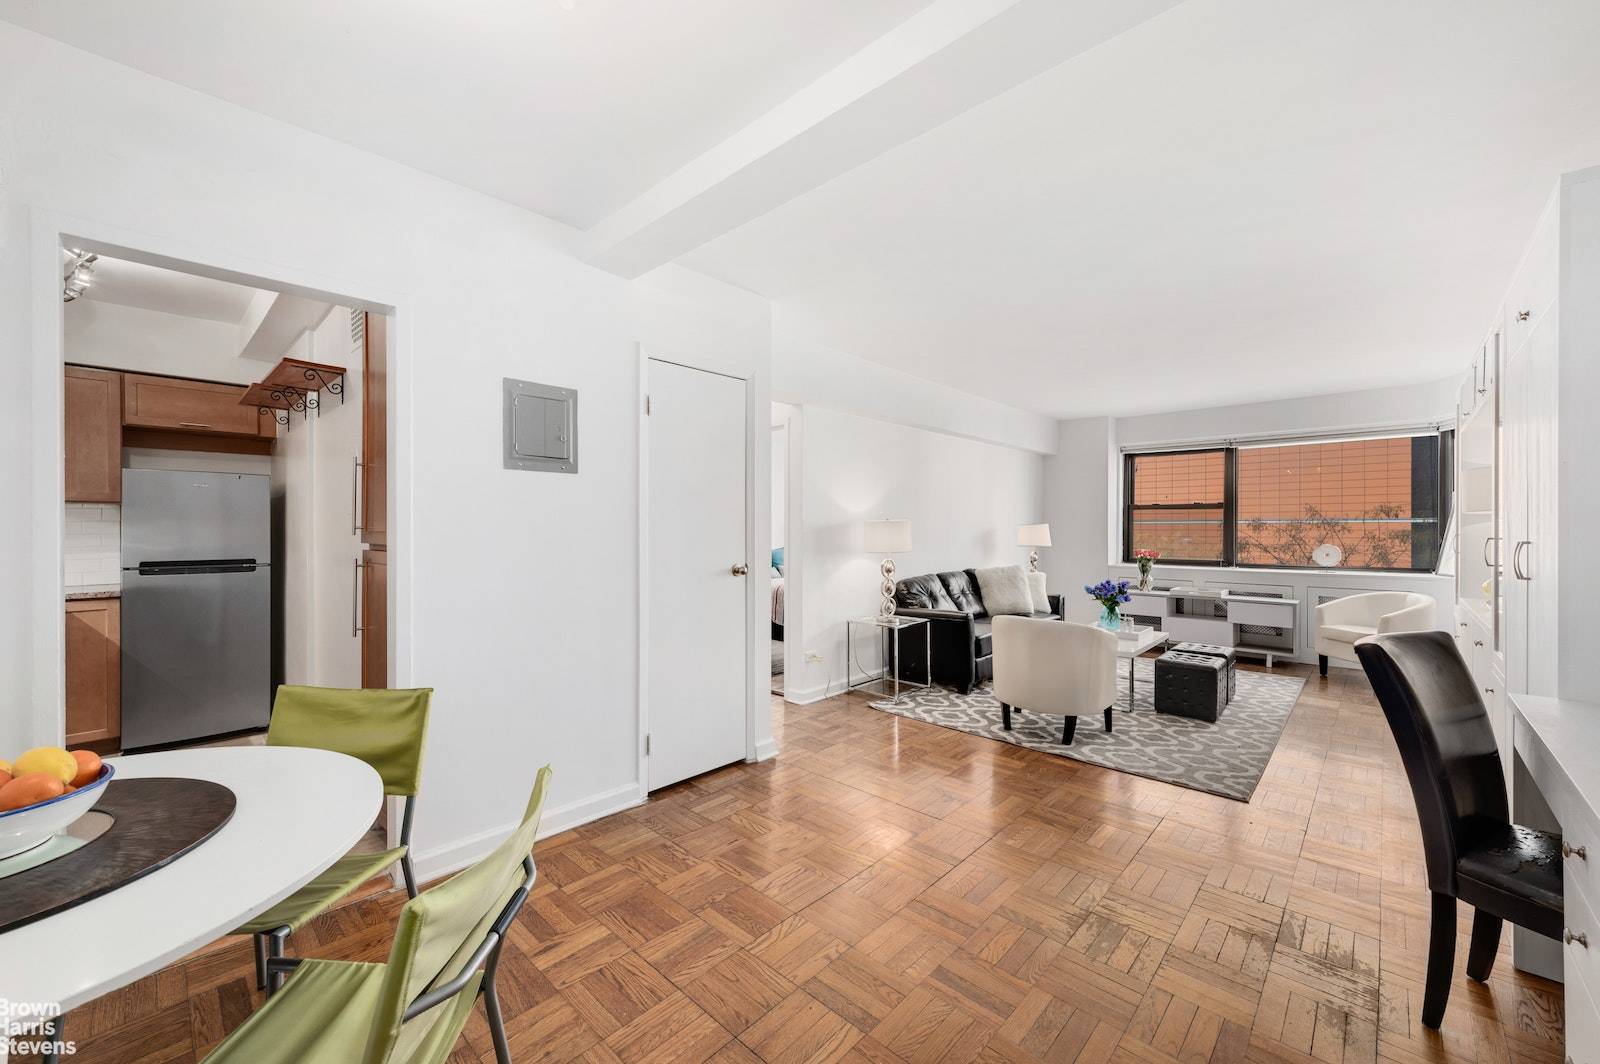 Welcome to Your New Home The Charing Cross House Experience luxury living in this beautifully renovated one bedroom apartment in the heart of the Upper East Side.